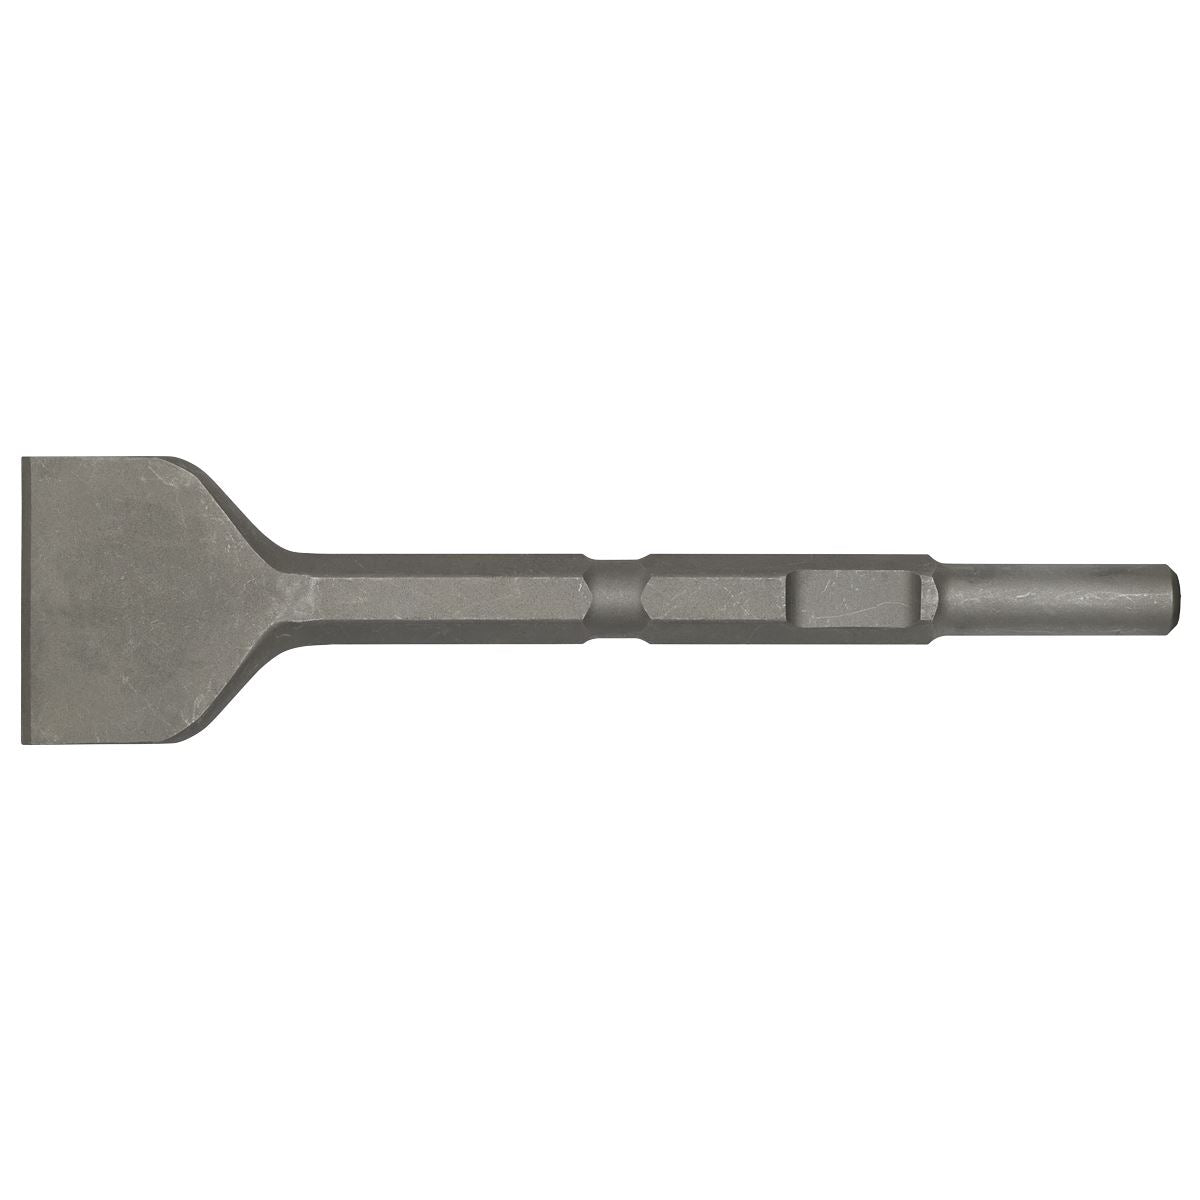 Worksafe by Sealey Wide Chisel 75mm - Kango 900